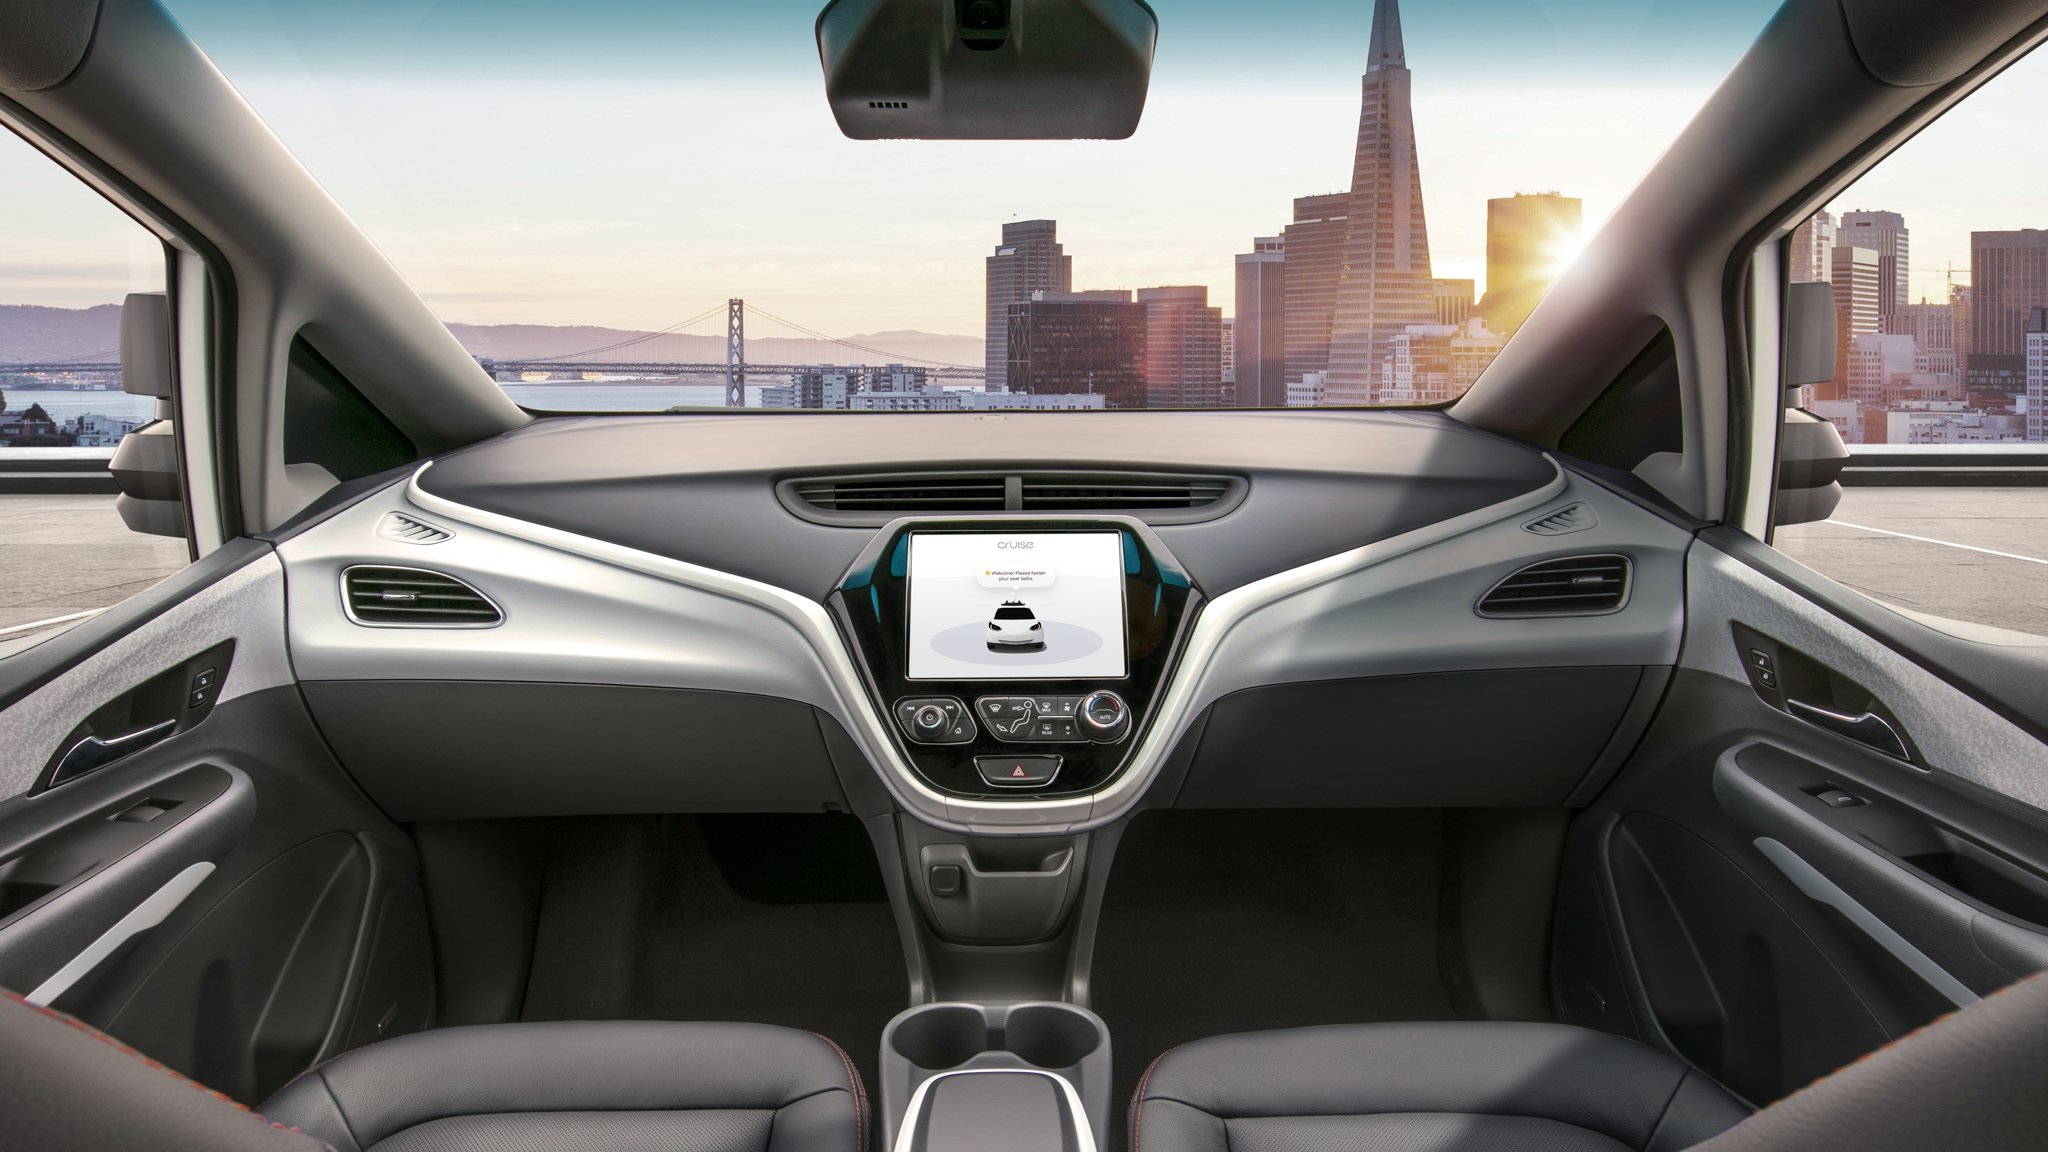 General Motors Reveals Image Of Car Without Driver Controls